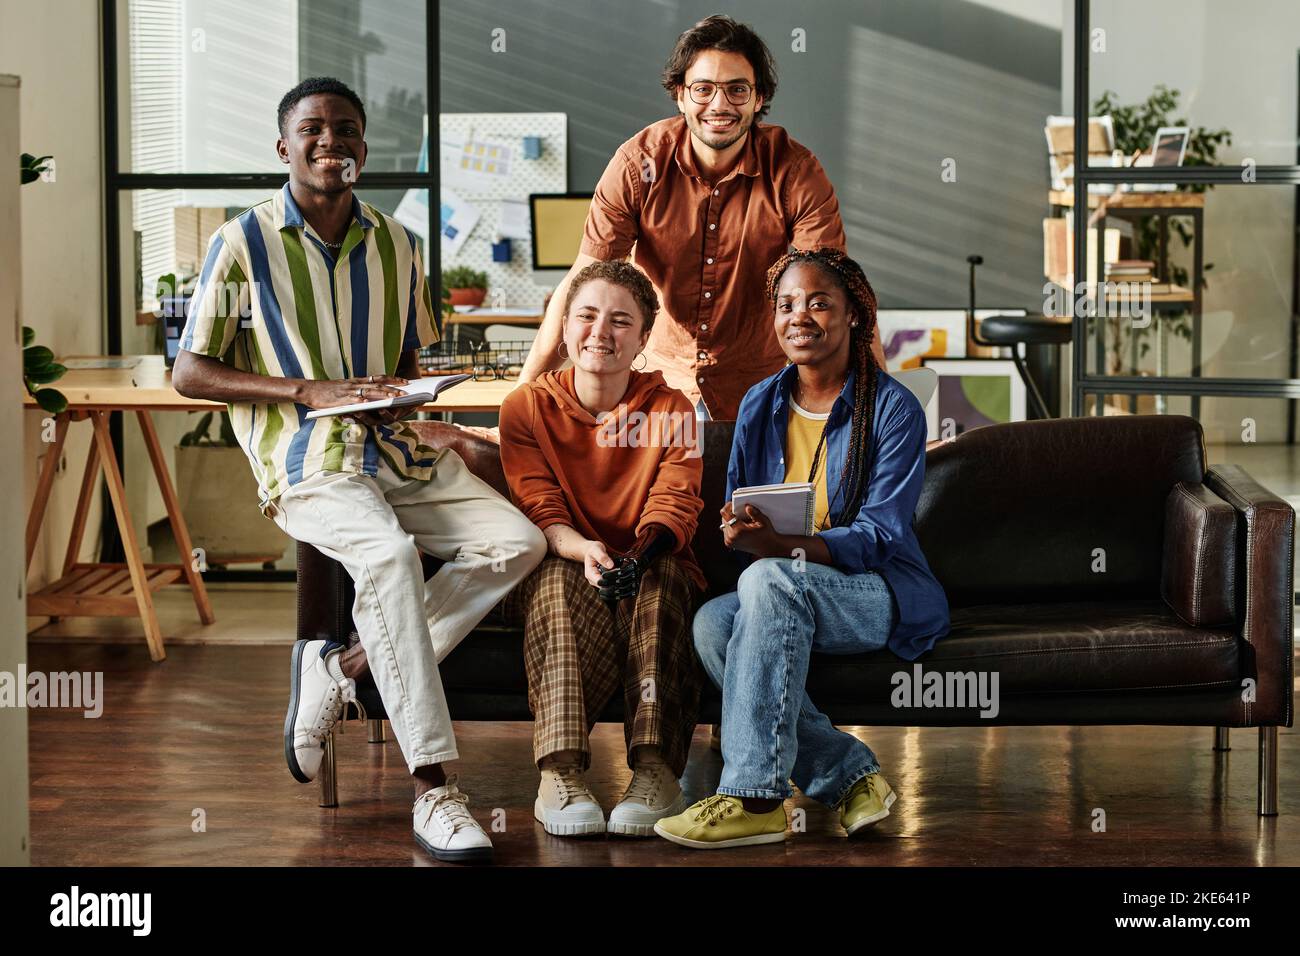 Four young successful interracial employees or creative designers in casualwear sitting on black leather couch in openspace office Stock Photo